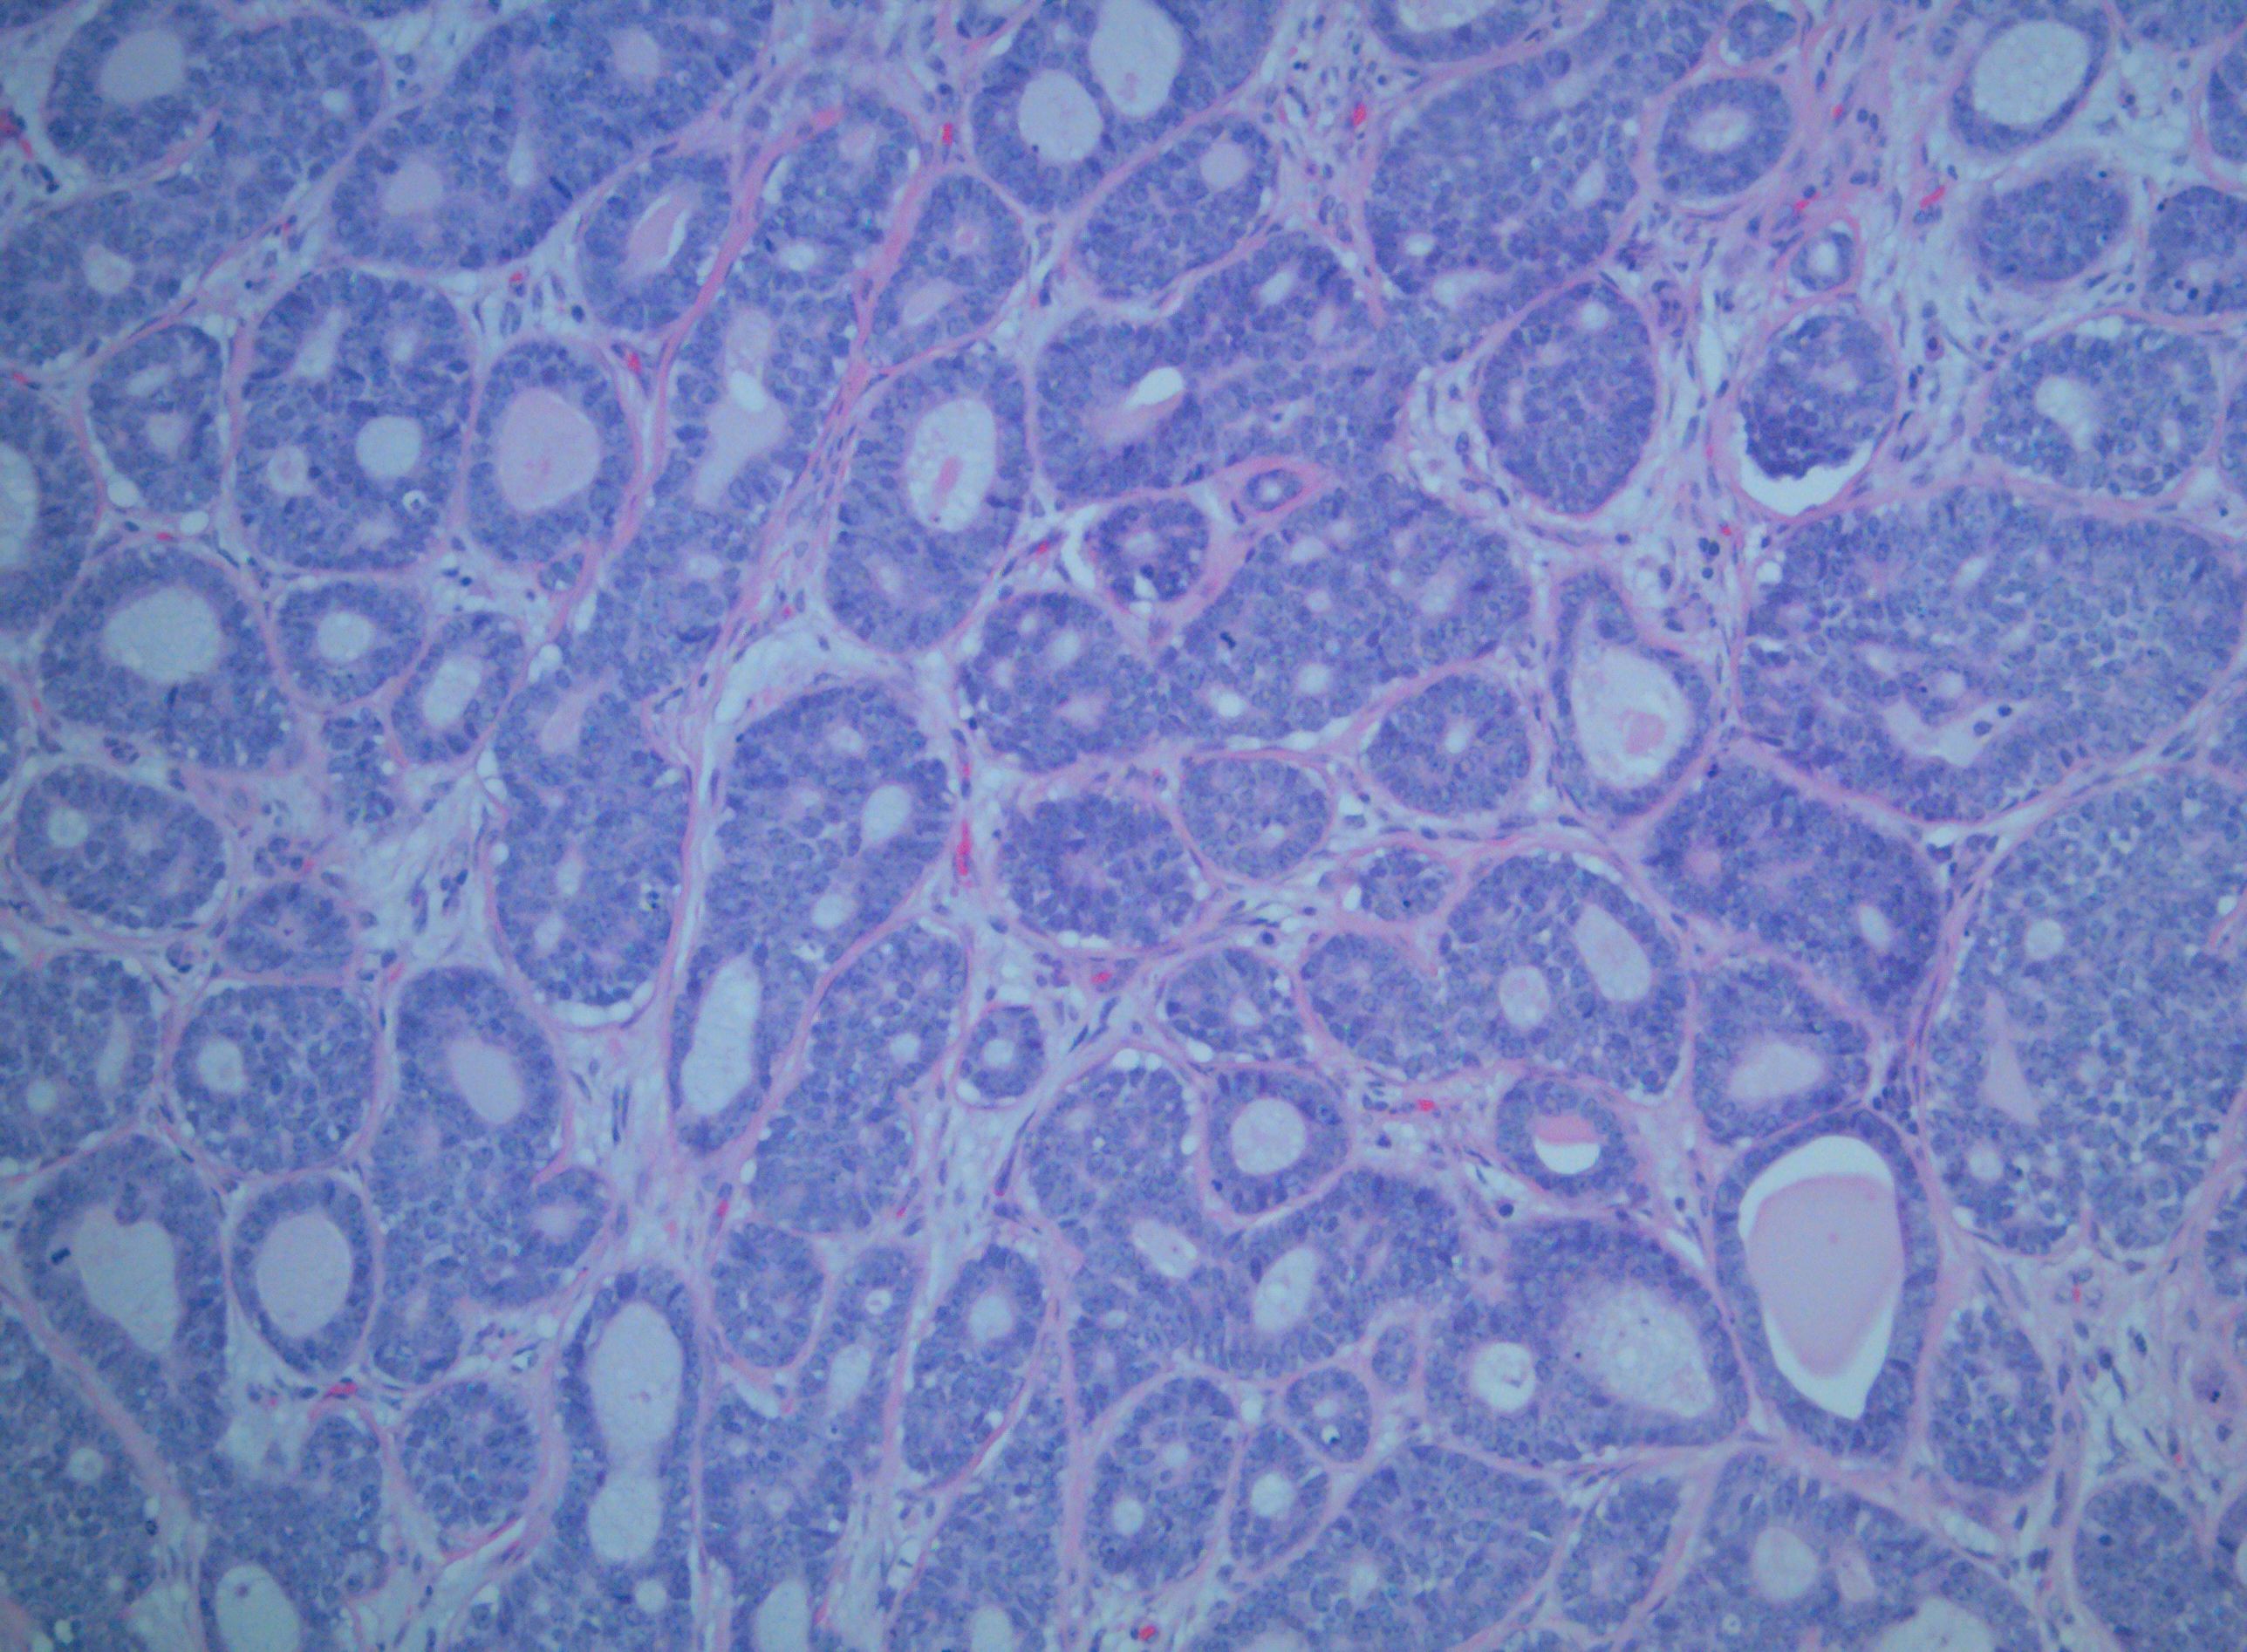 <p>Adenoid Cystic Carcinoma (AdCC) of the Palate</p>